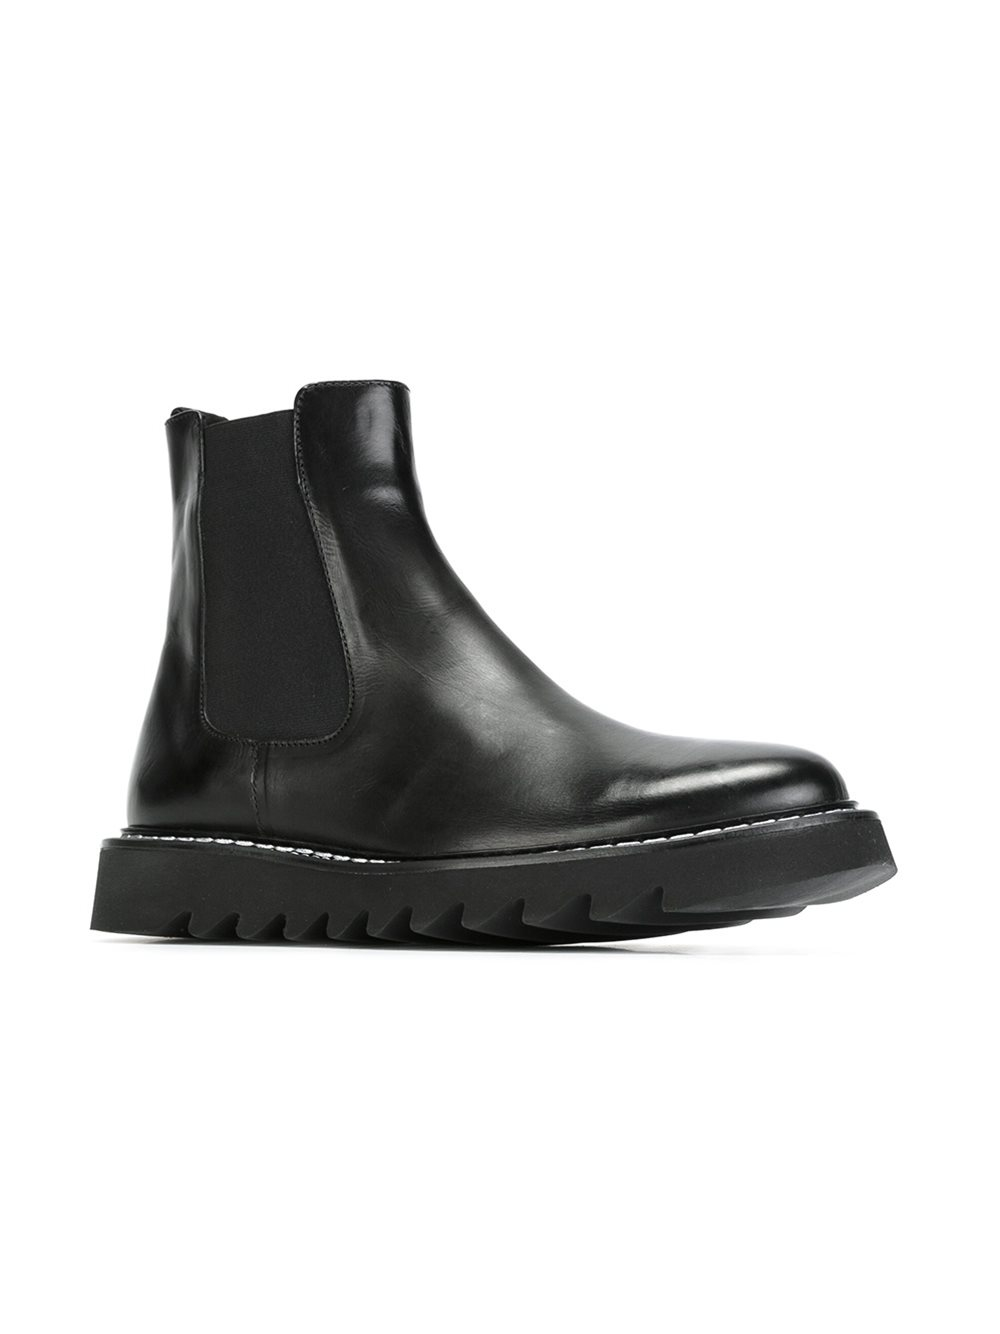 Cesare Paciotti Leather Ridged Sole Chelsea Boots in Black - Lyst